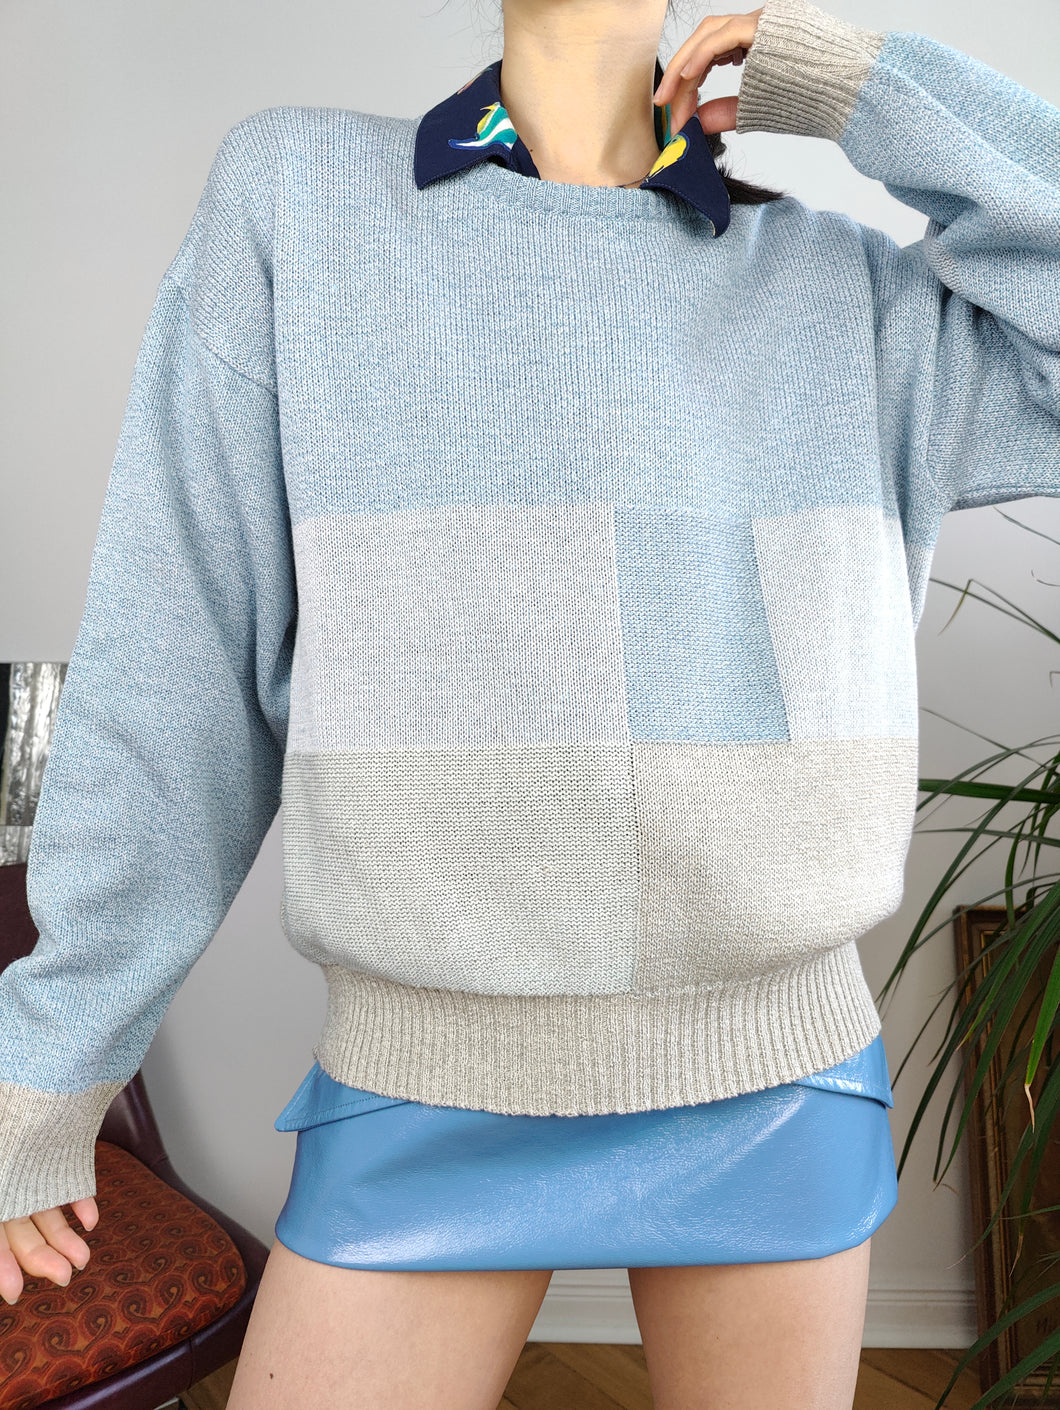 Vintage cotton mix blue knit knitted sweater light block pattern pullover jumper M